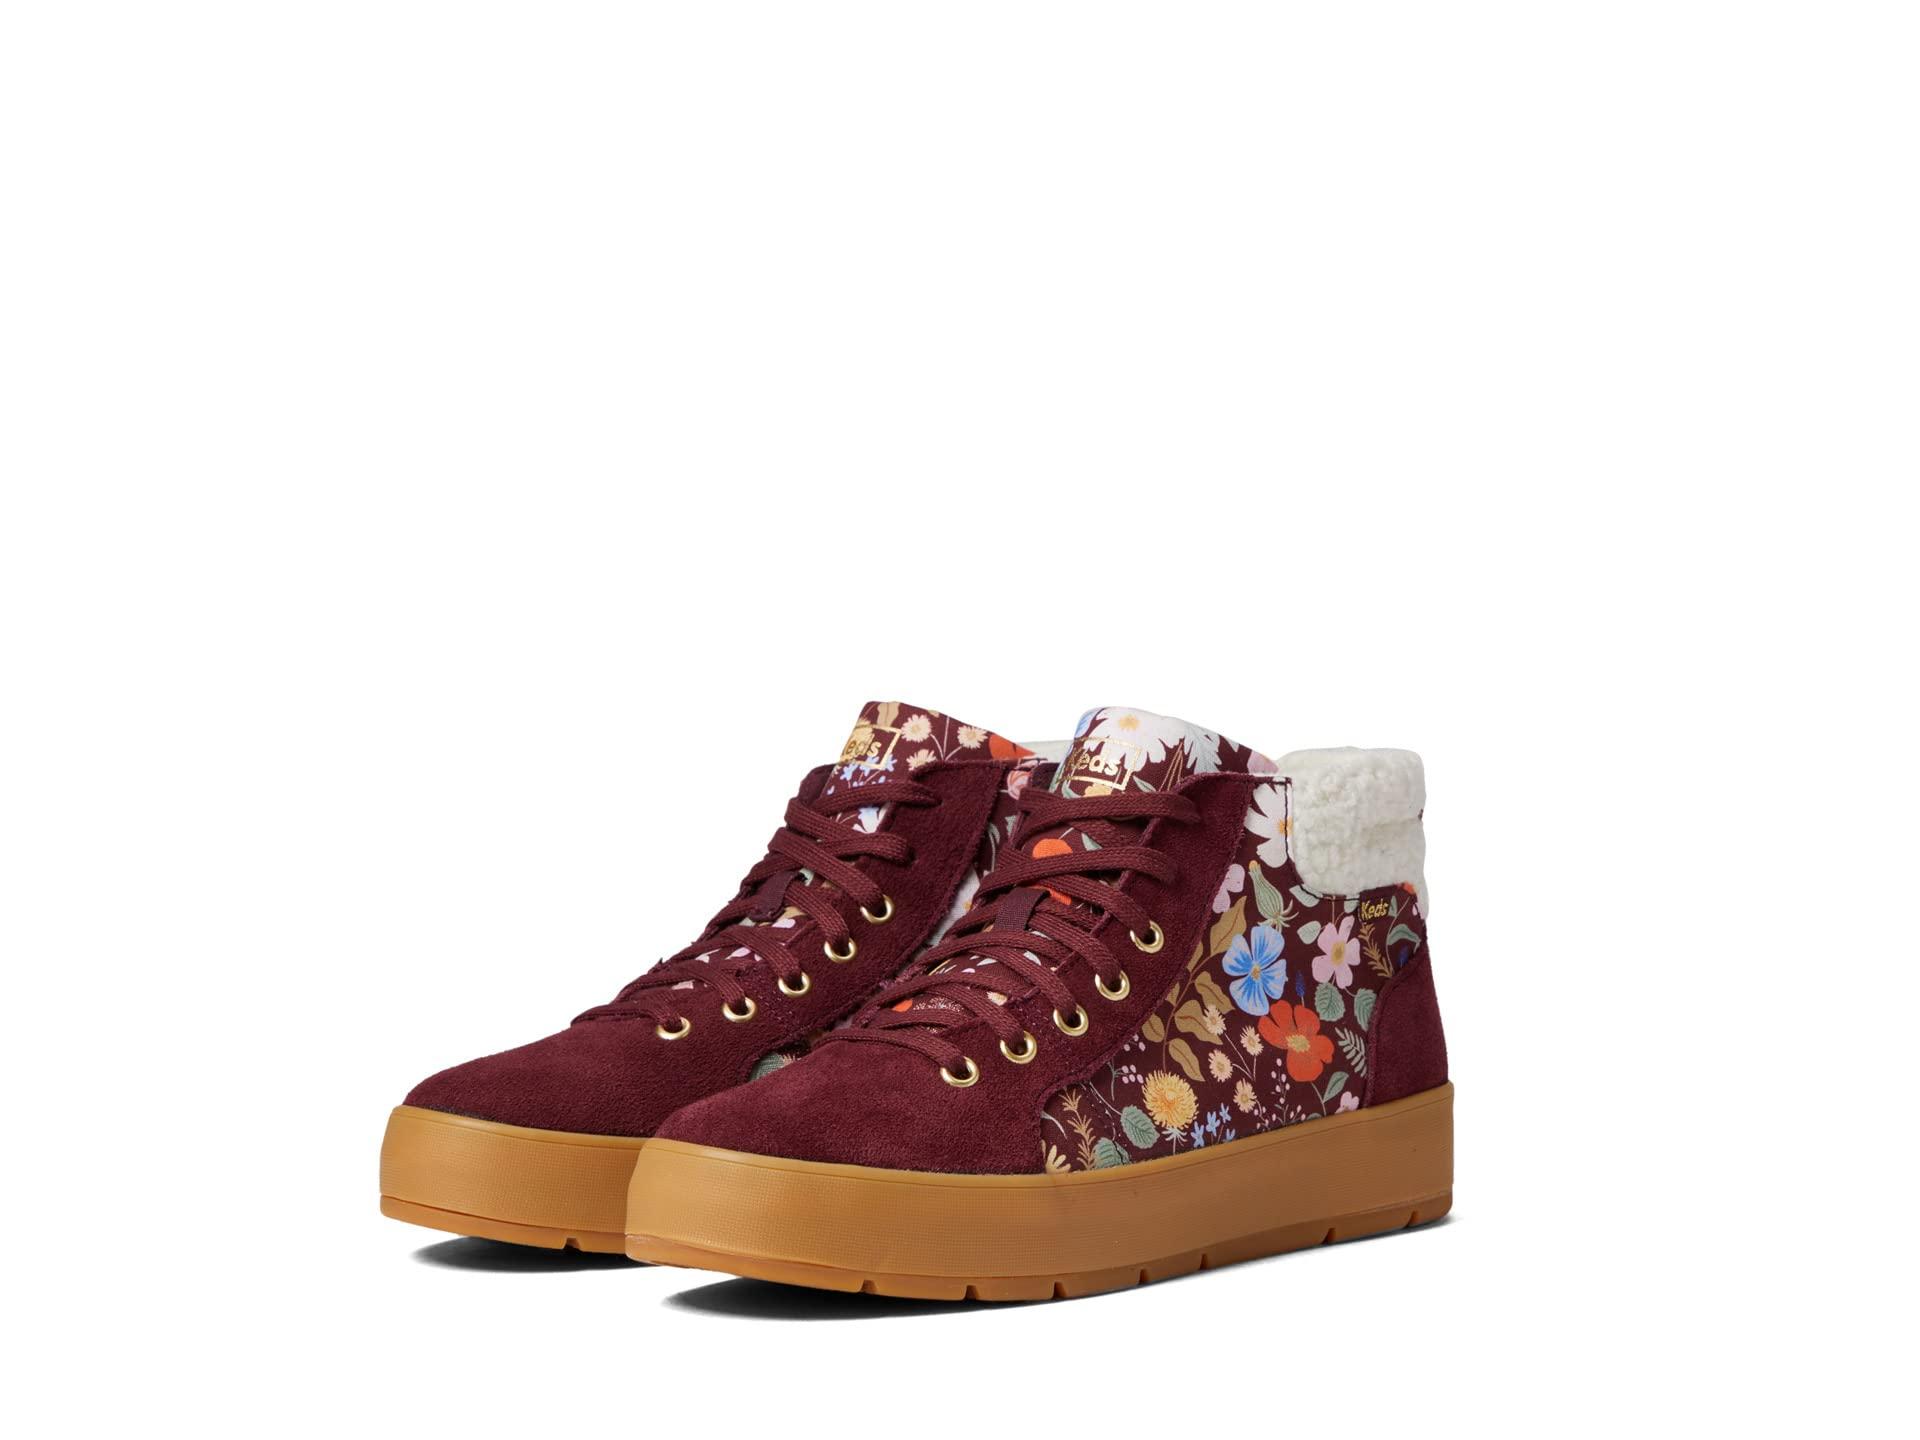 Keds X Rifle Paper Co. - Spade Tahoe Nouveau Suede in Brown | Lyst